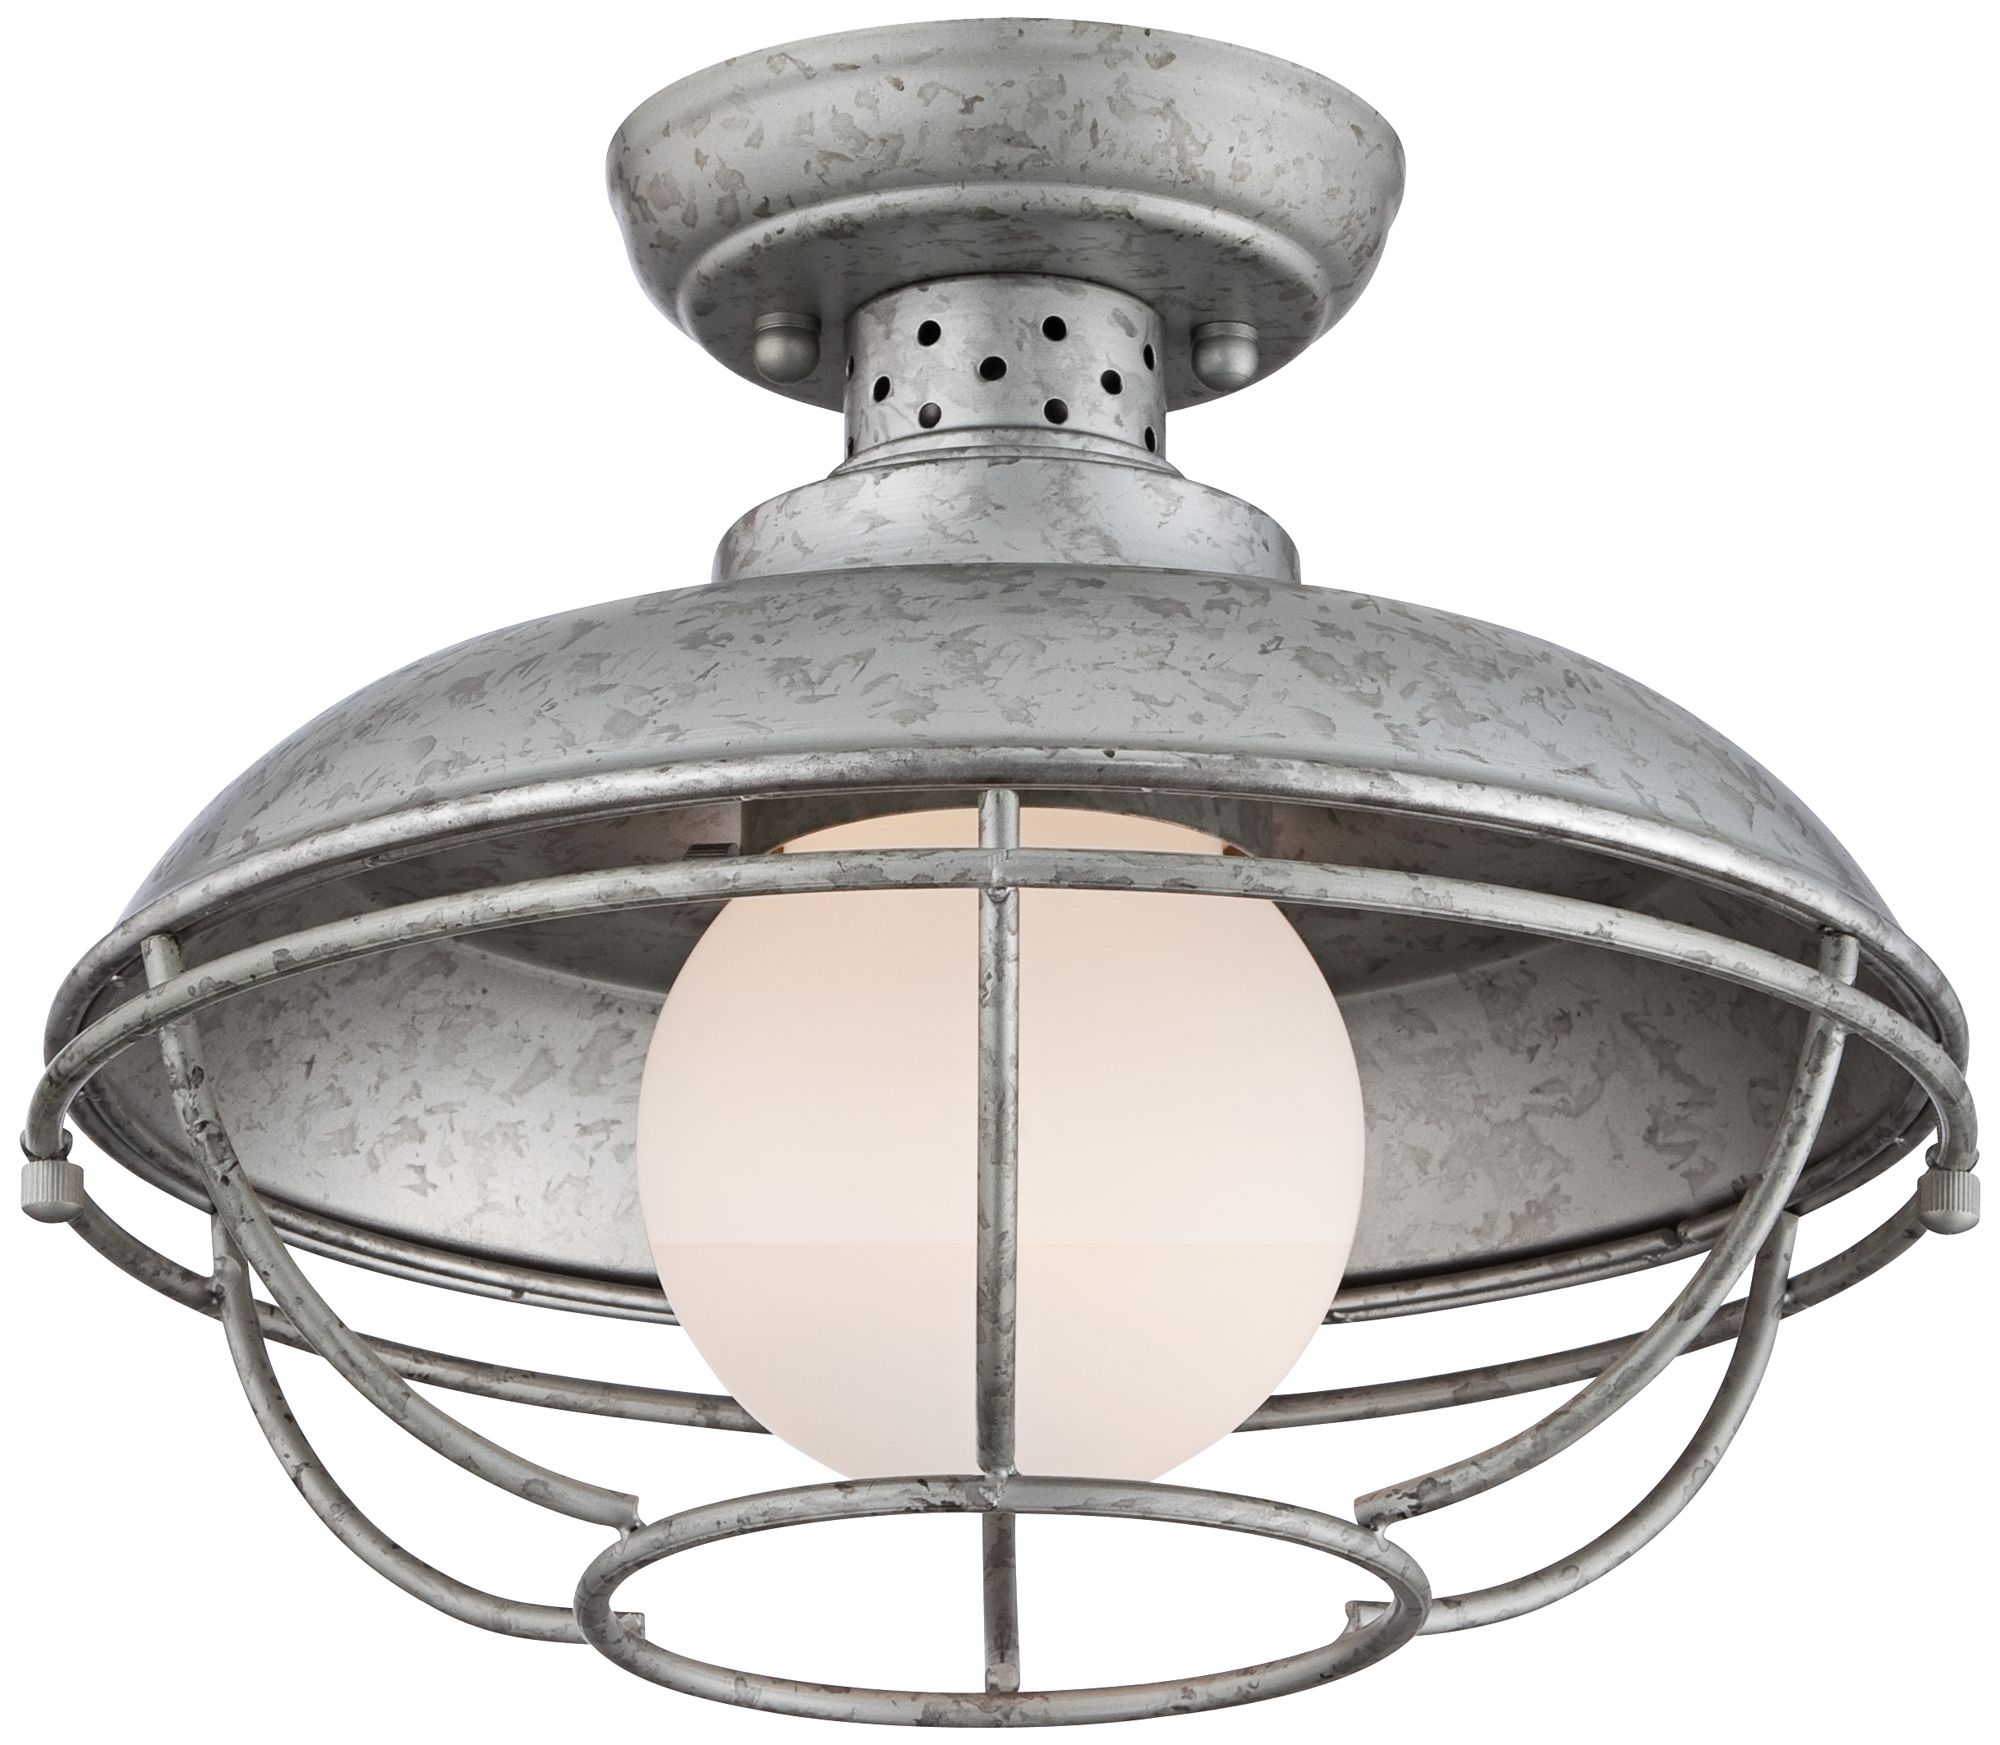 Franklin Iron Works Farmhouse Outdoor Ceiling Light- see a bunch more helpful ideas for rustic farmhouse decor and resources for lovely metalware!